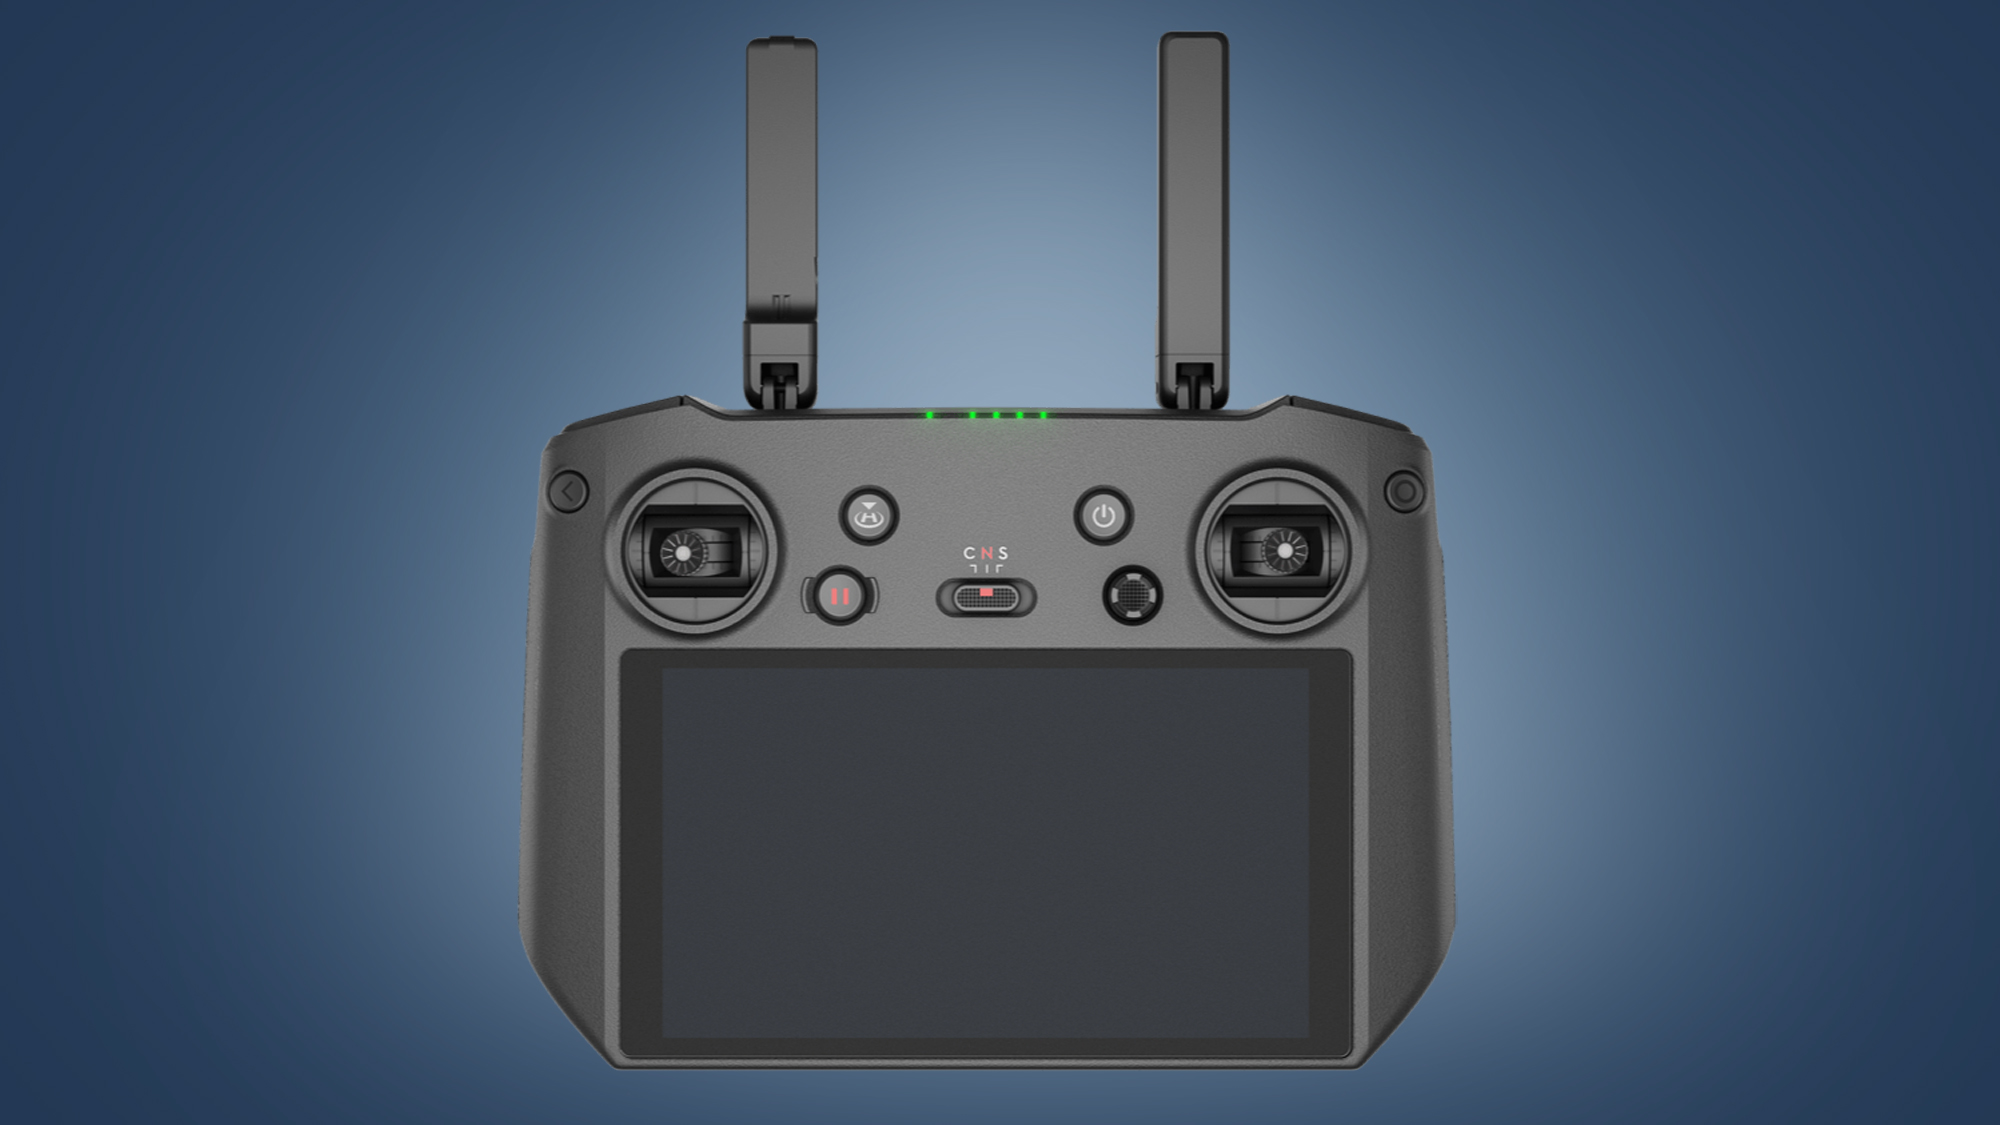 The DJI RC Pro drone controller on a blue background